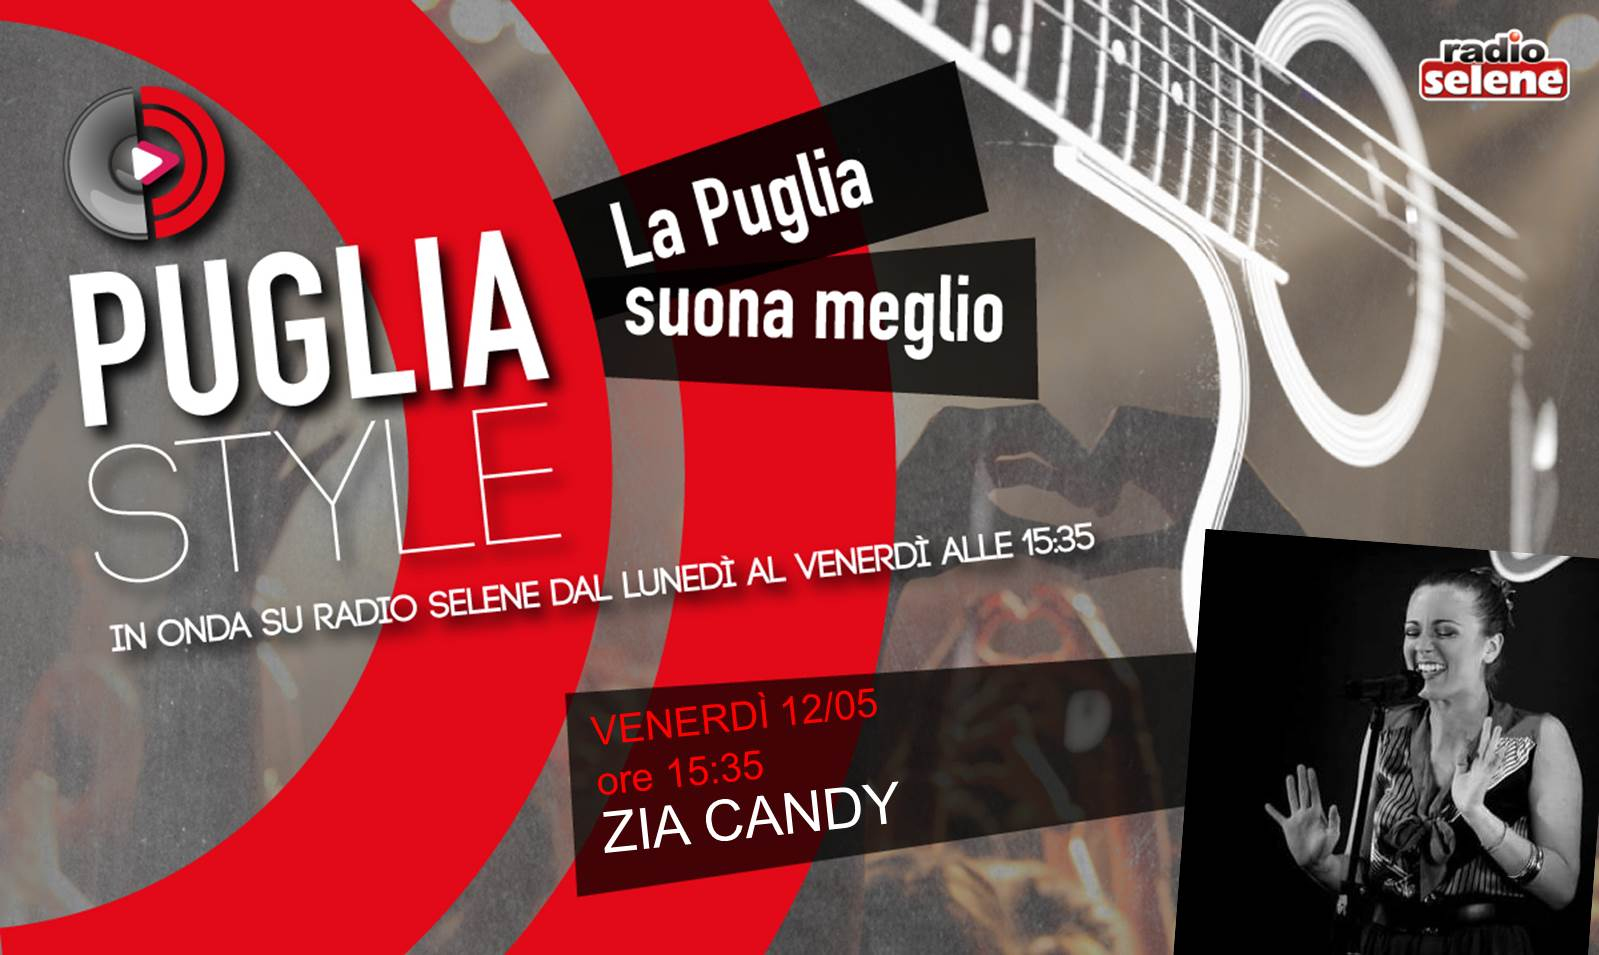 12-05-2017: ZIA CANDY